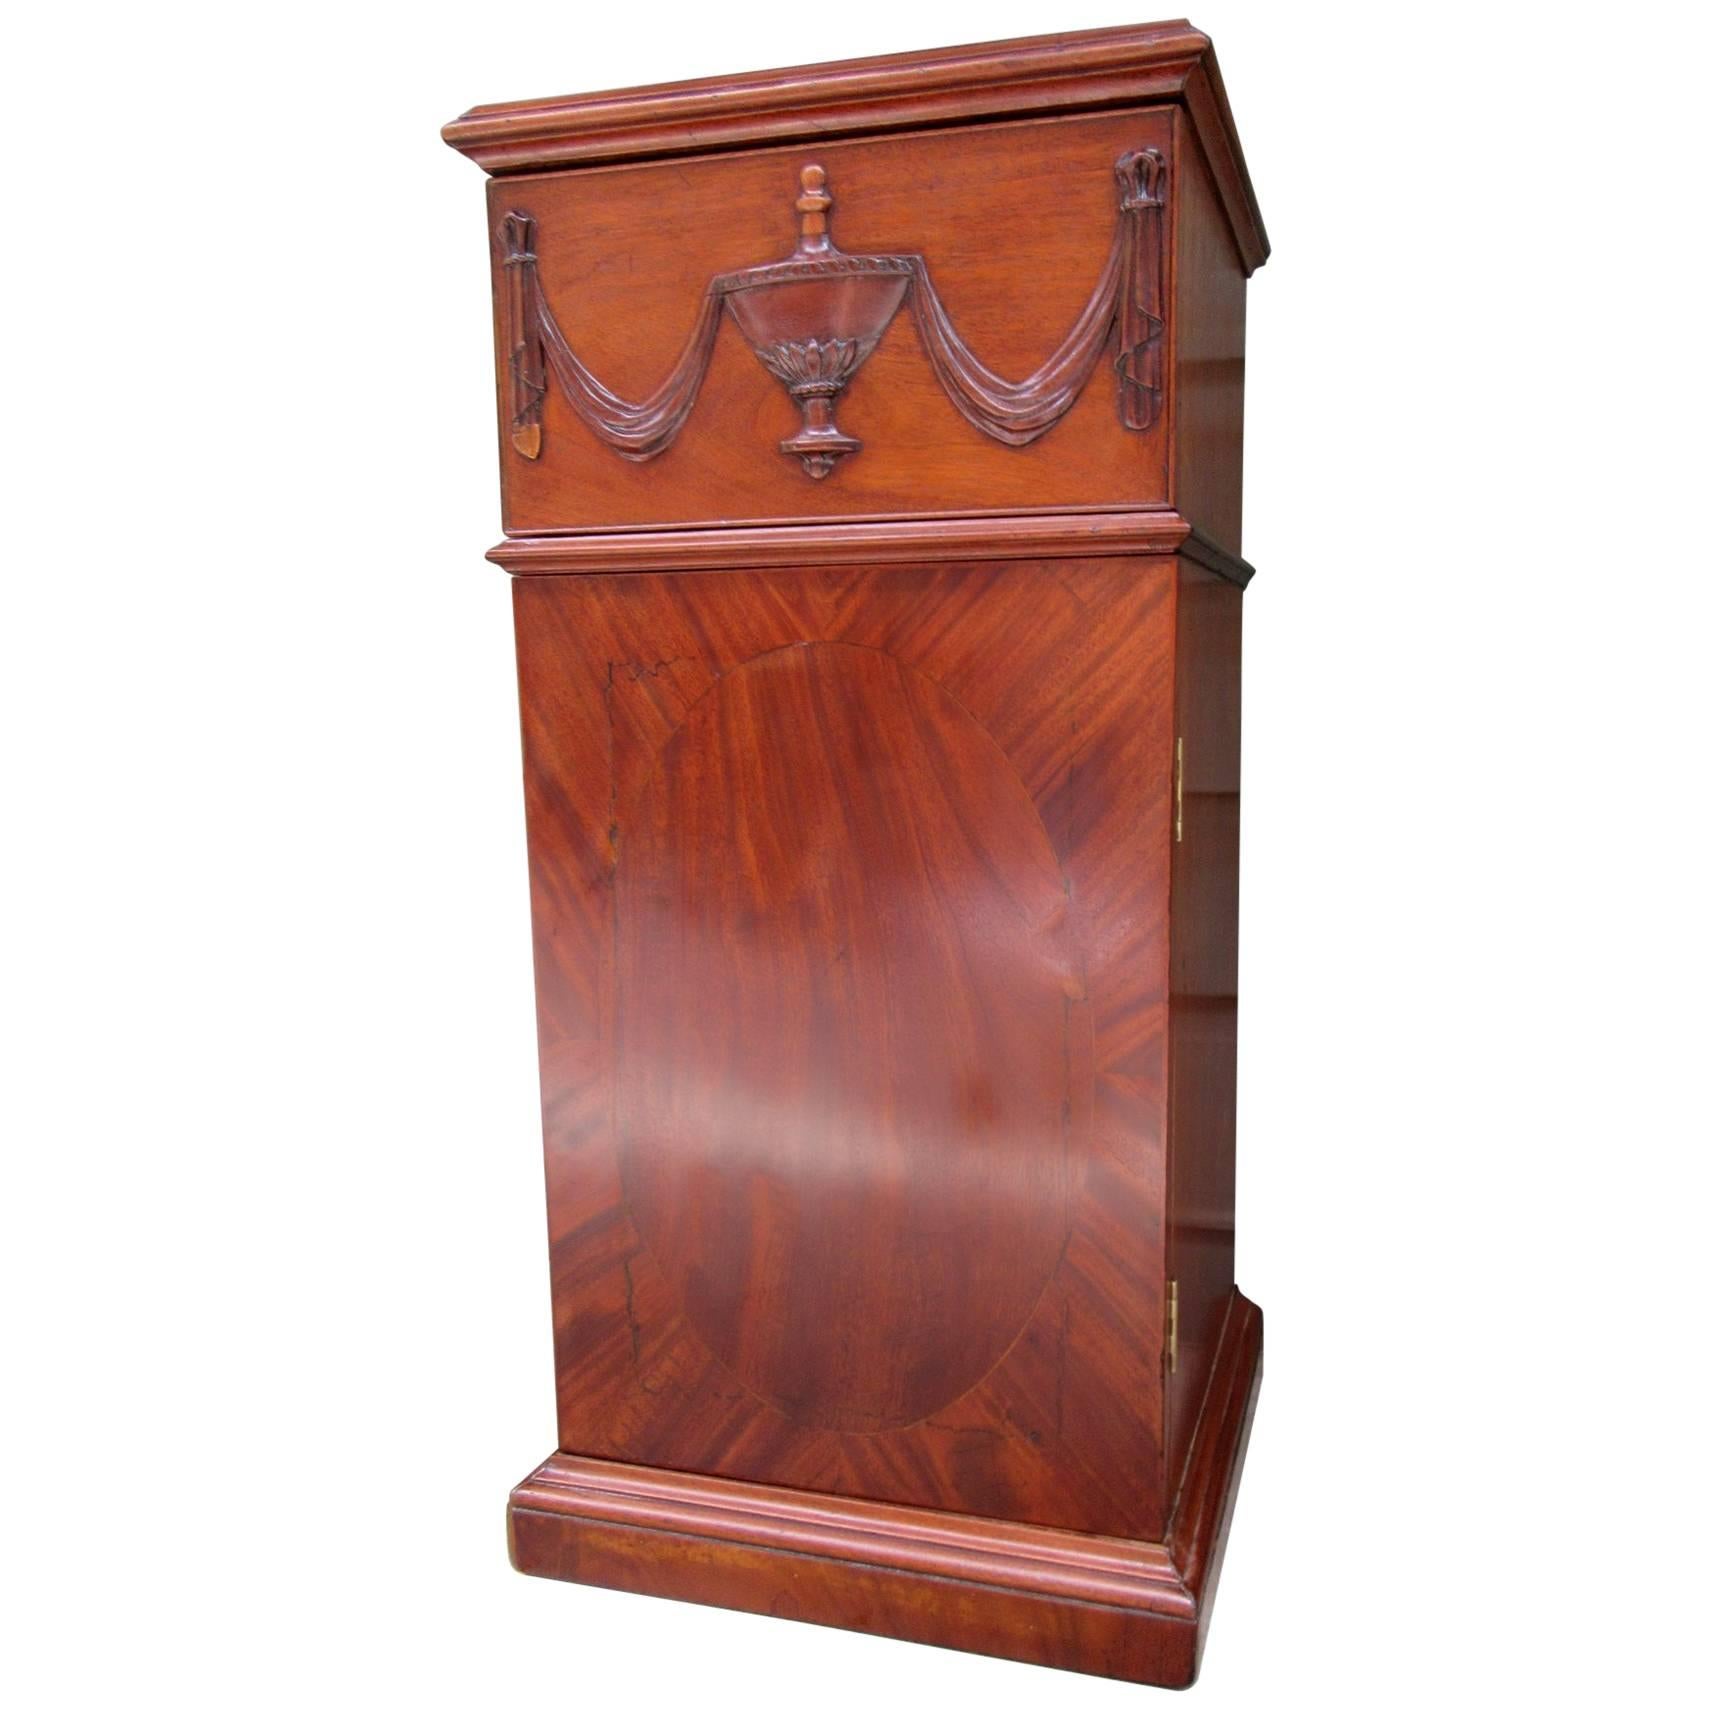 Early 19th Century English Regency Mahogany Pedestal Cabinet with Urn Carving